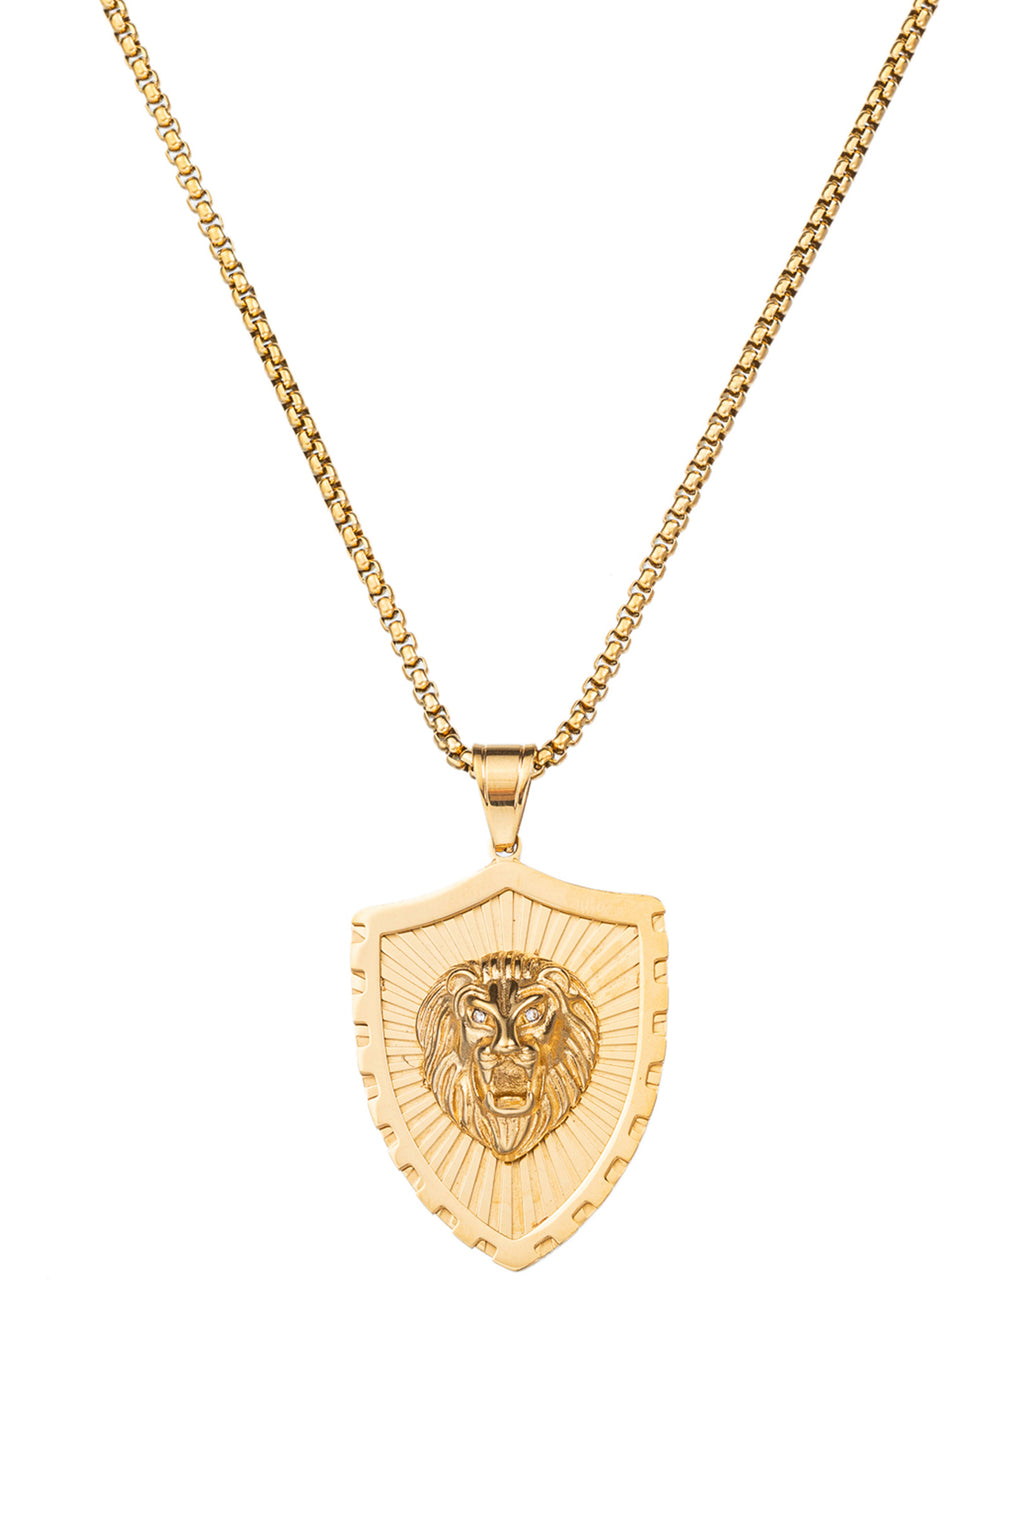 Gold tone titanium lion head shield pendant necklace studded with CZ crystals.